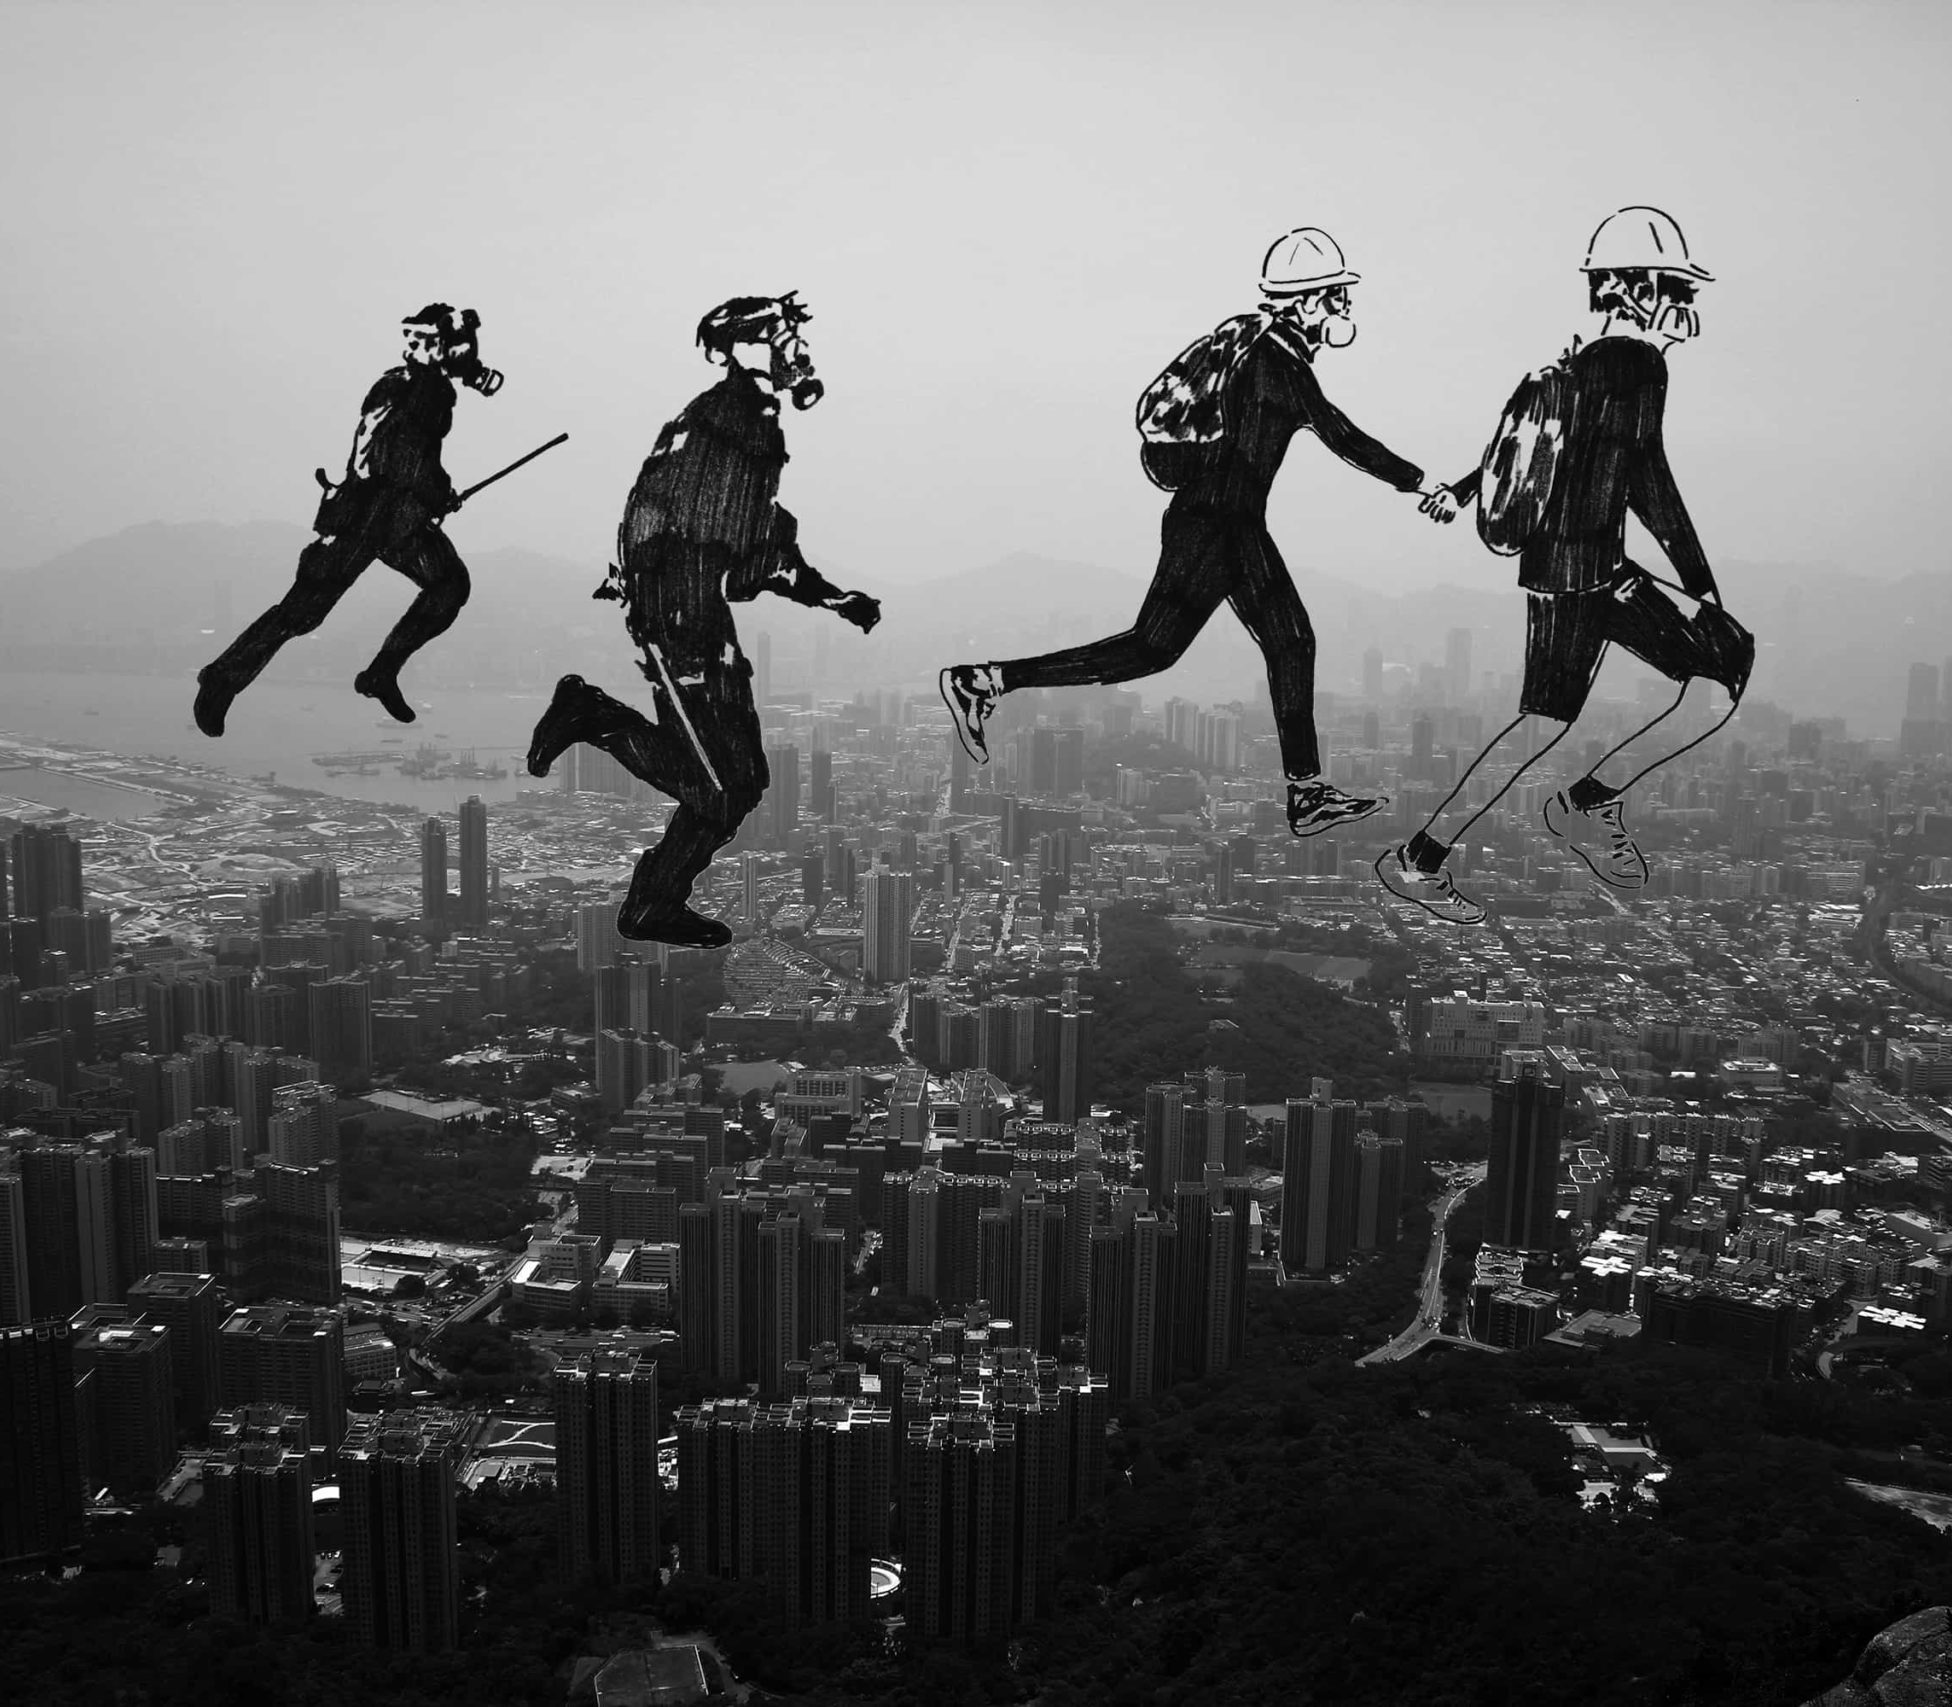 Illustrated protesters running on top of the Hong Kong Skyline